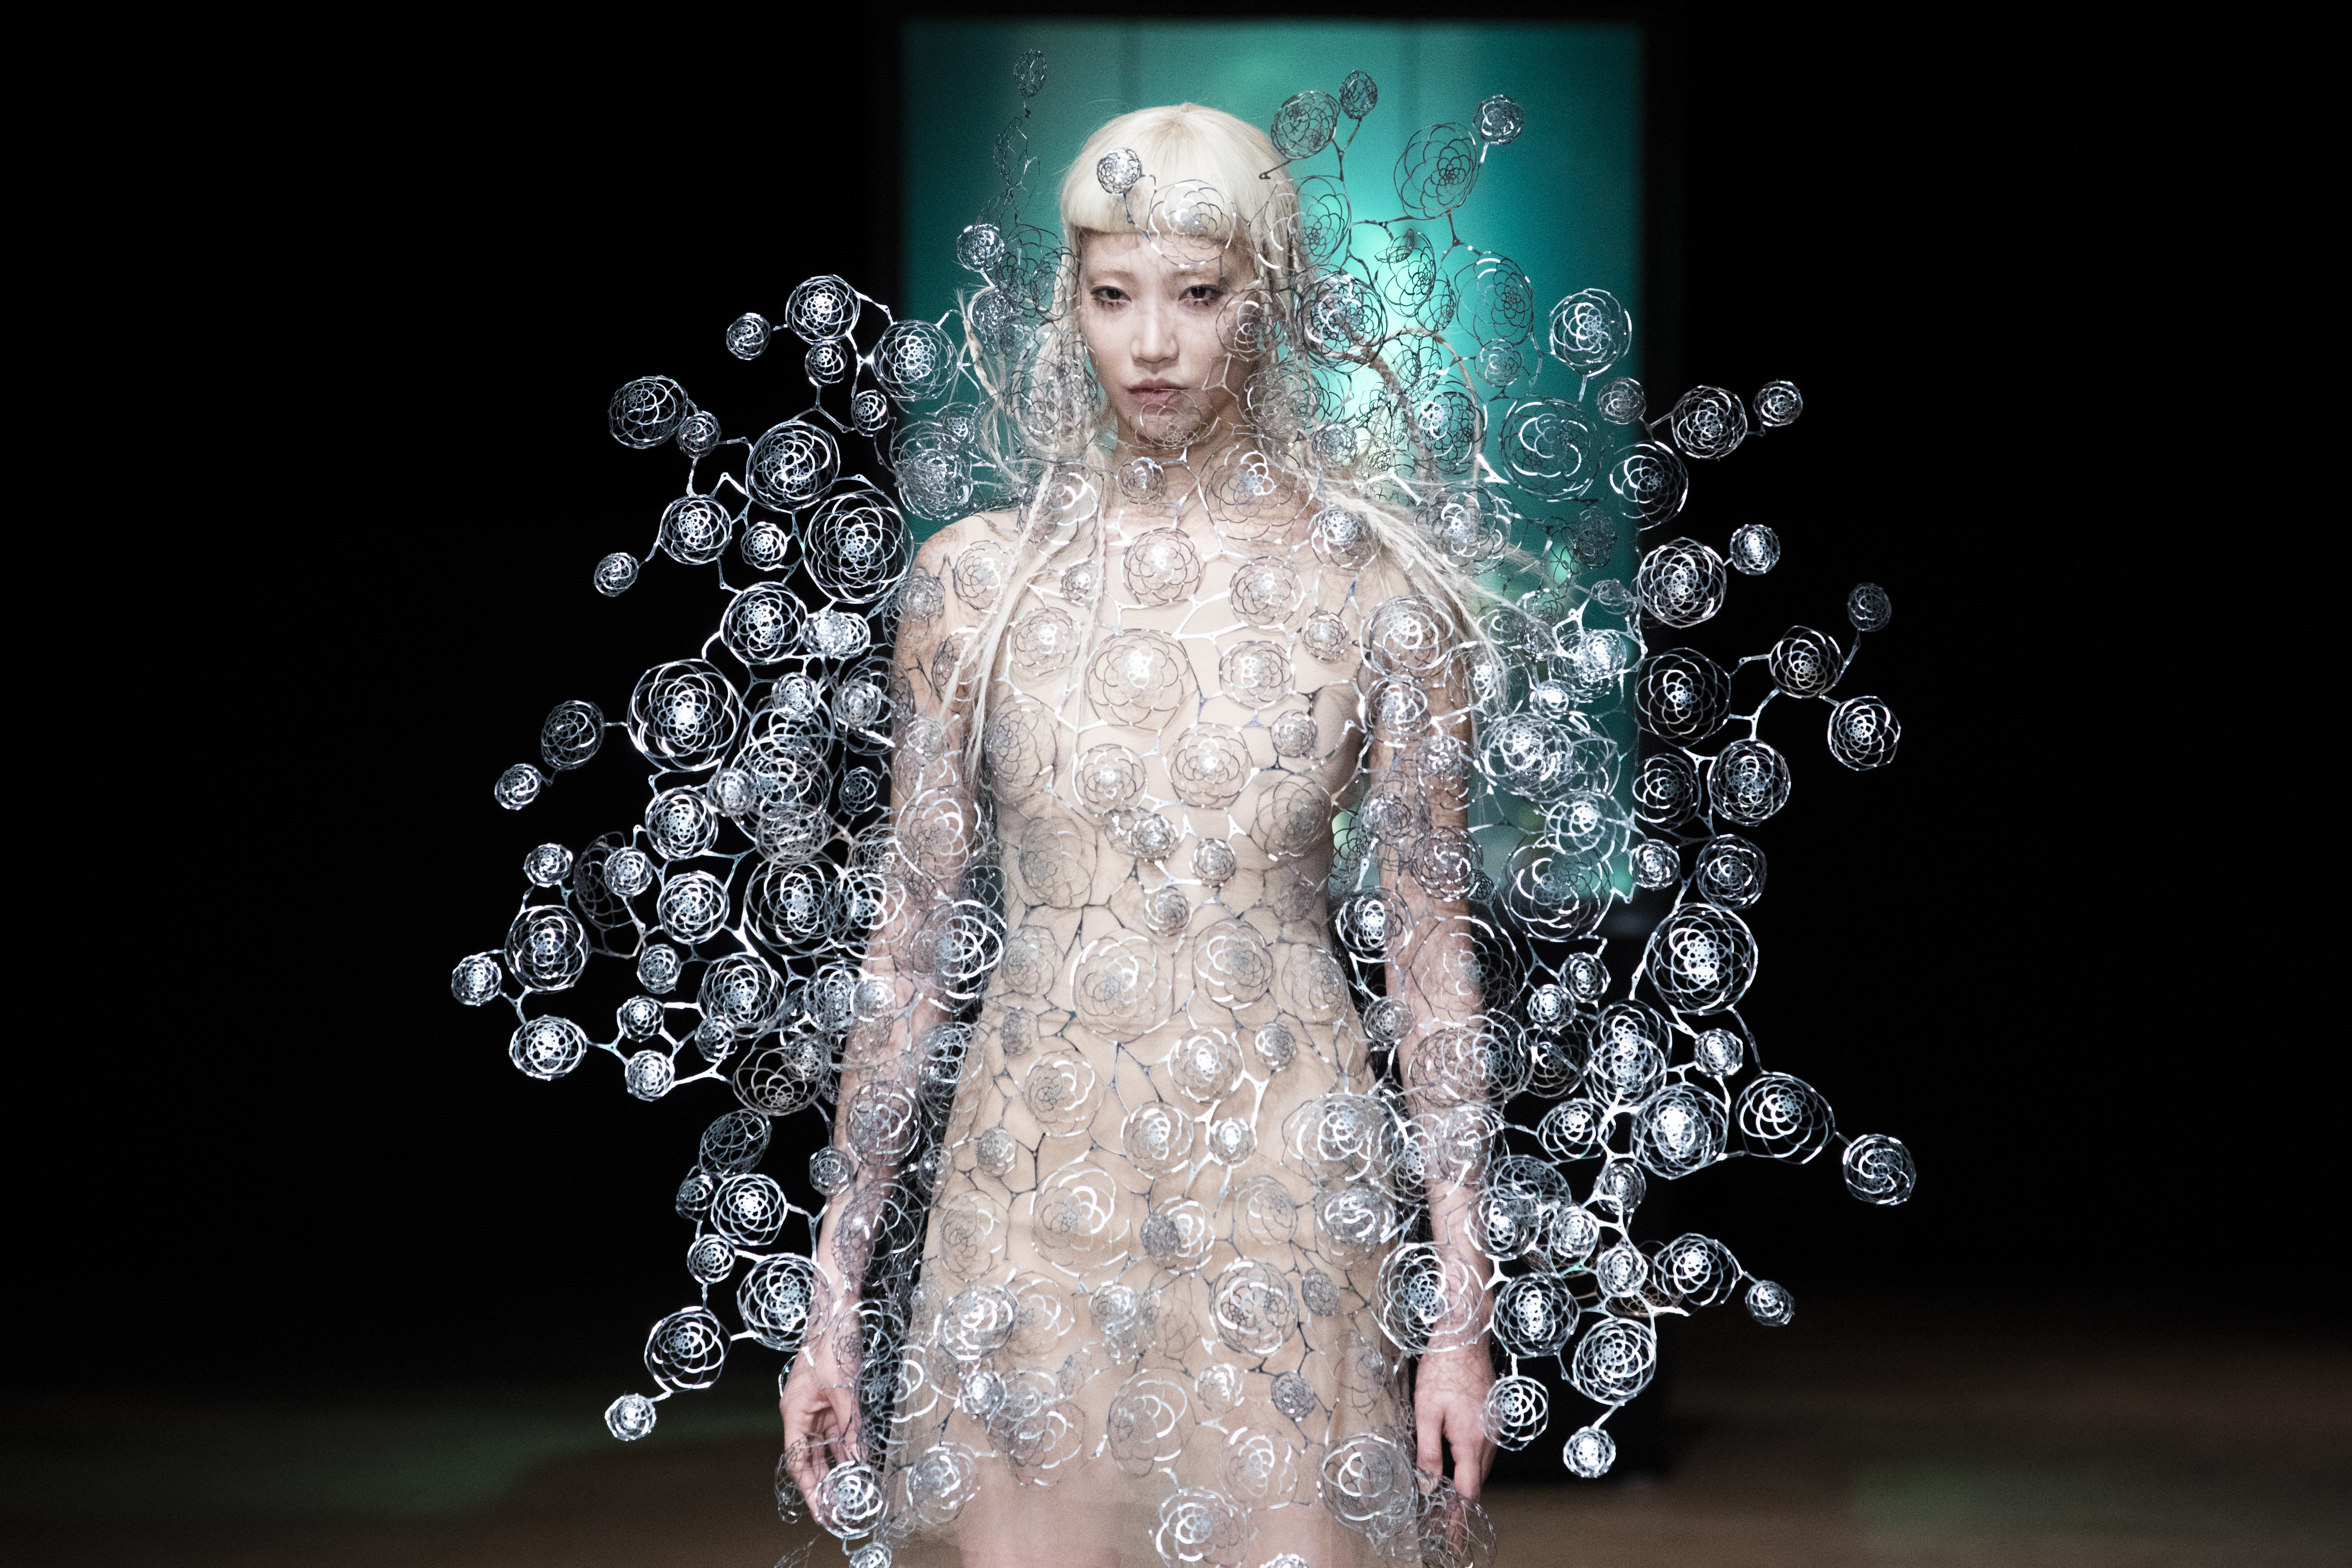 A model wears a creation for Iris Van Herpen's Haute Couture Fall/Winter 2017/2018 fashion collection presented in Paris, Monday, July 3, 2017. (AP Photo/Kamil Zihnioglu)